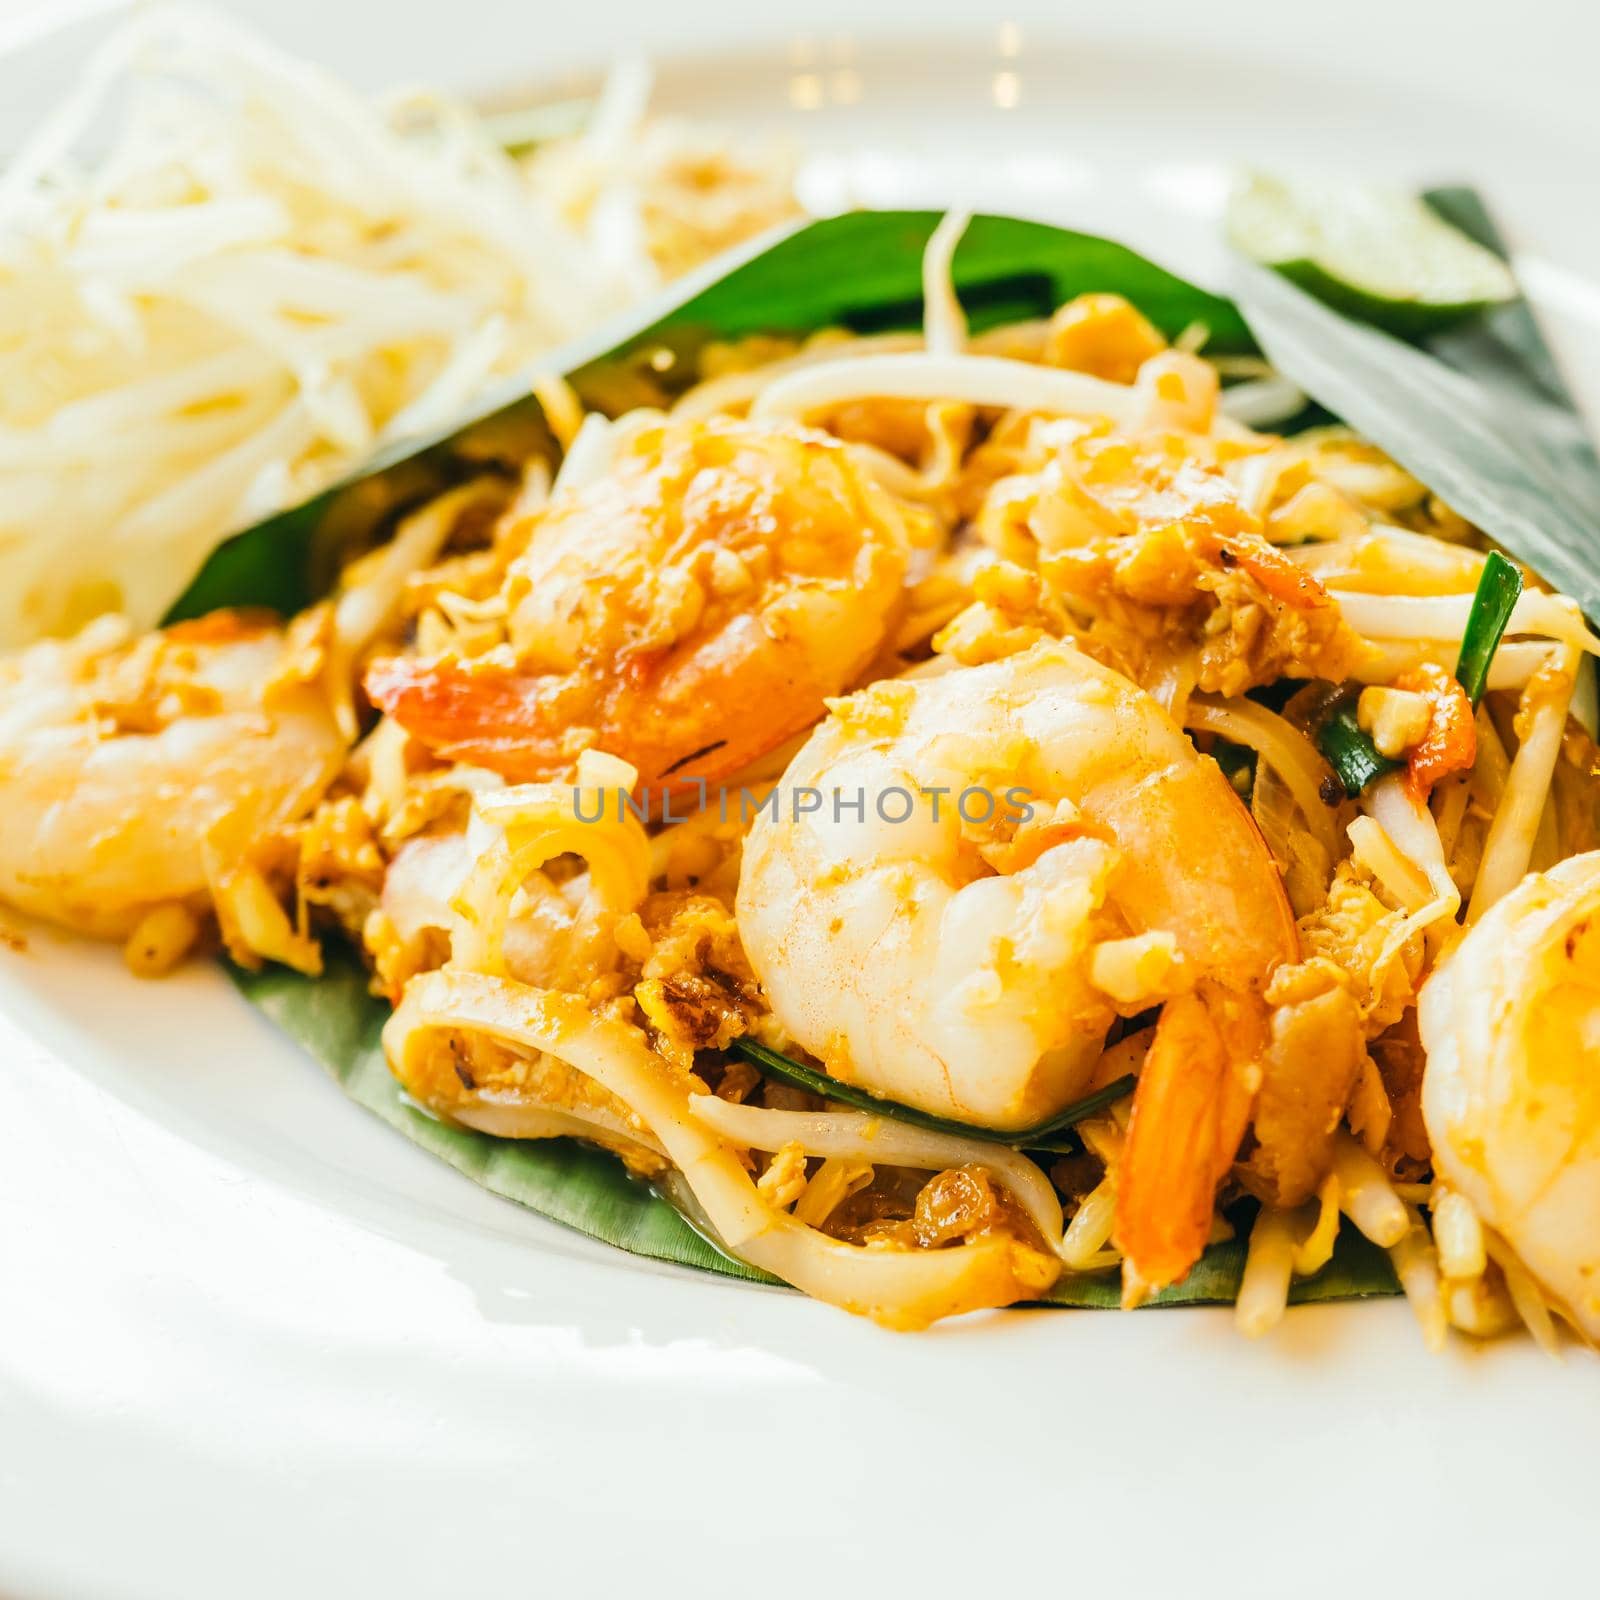 Pad thai noodles with prawn in white plate - Color Filter Processing